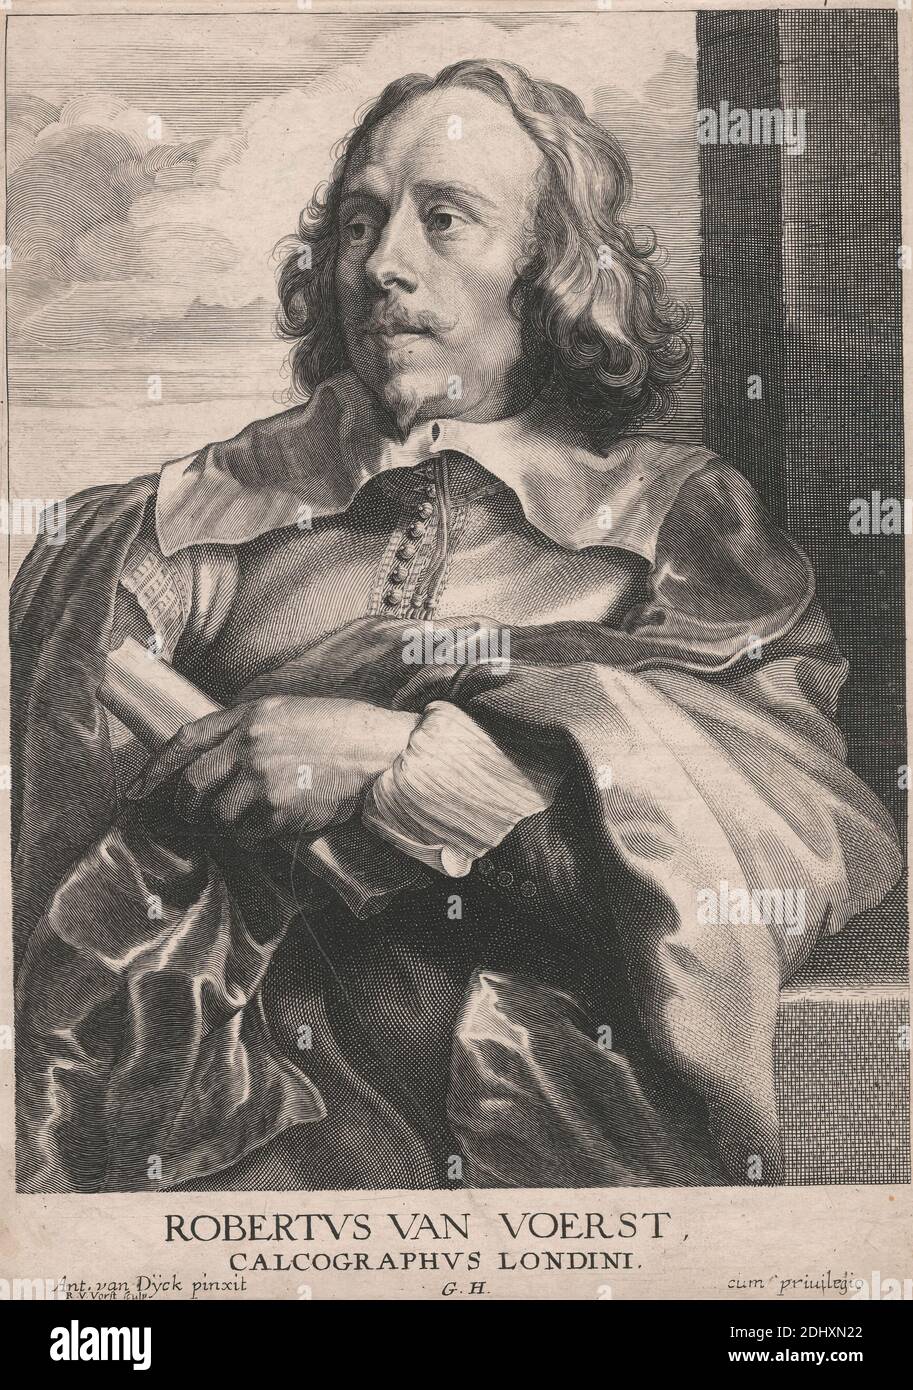 Robertus van Voerst, Calcographus Londini, Robert van Voerst, 1597–1636, Dutch, active in Britain (from 1627), after Sir Anthony Van Dyck, 1599–1641, Flemish, active in Britain (1620–21; 1632–34; 1635–41), ca.1635, Line engraving and stipple engraving (4th state) on medium, slightly textured, browned white, laid paper, mounted on, moderately thick, slightly textured, beige, wove paper, Mount: 11 1/16 × 8 5/16 inches (28.1 × 21.1 cm), Sheet: 9 7/16 × 6 3/4 inches (24 × 17.1 cm), and Image: 8 1/2 × 6 1/2 inches (21.6 × 16.5 cm Stock Photo